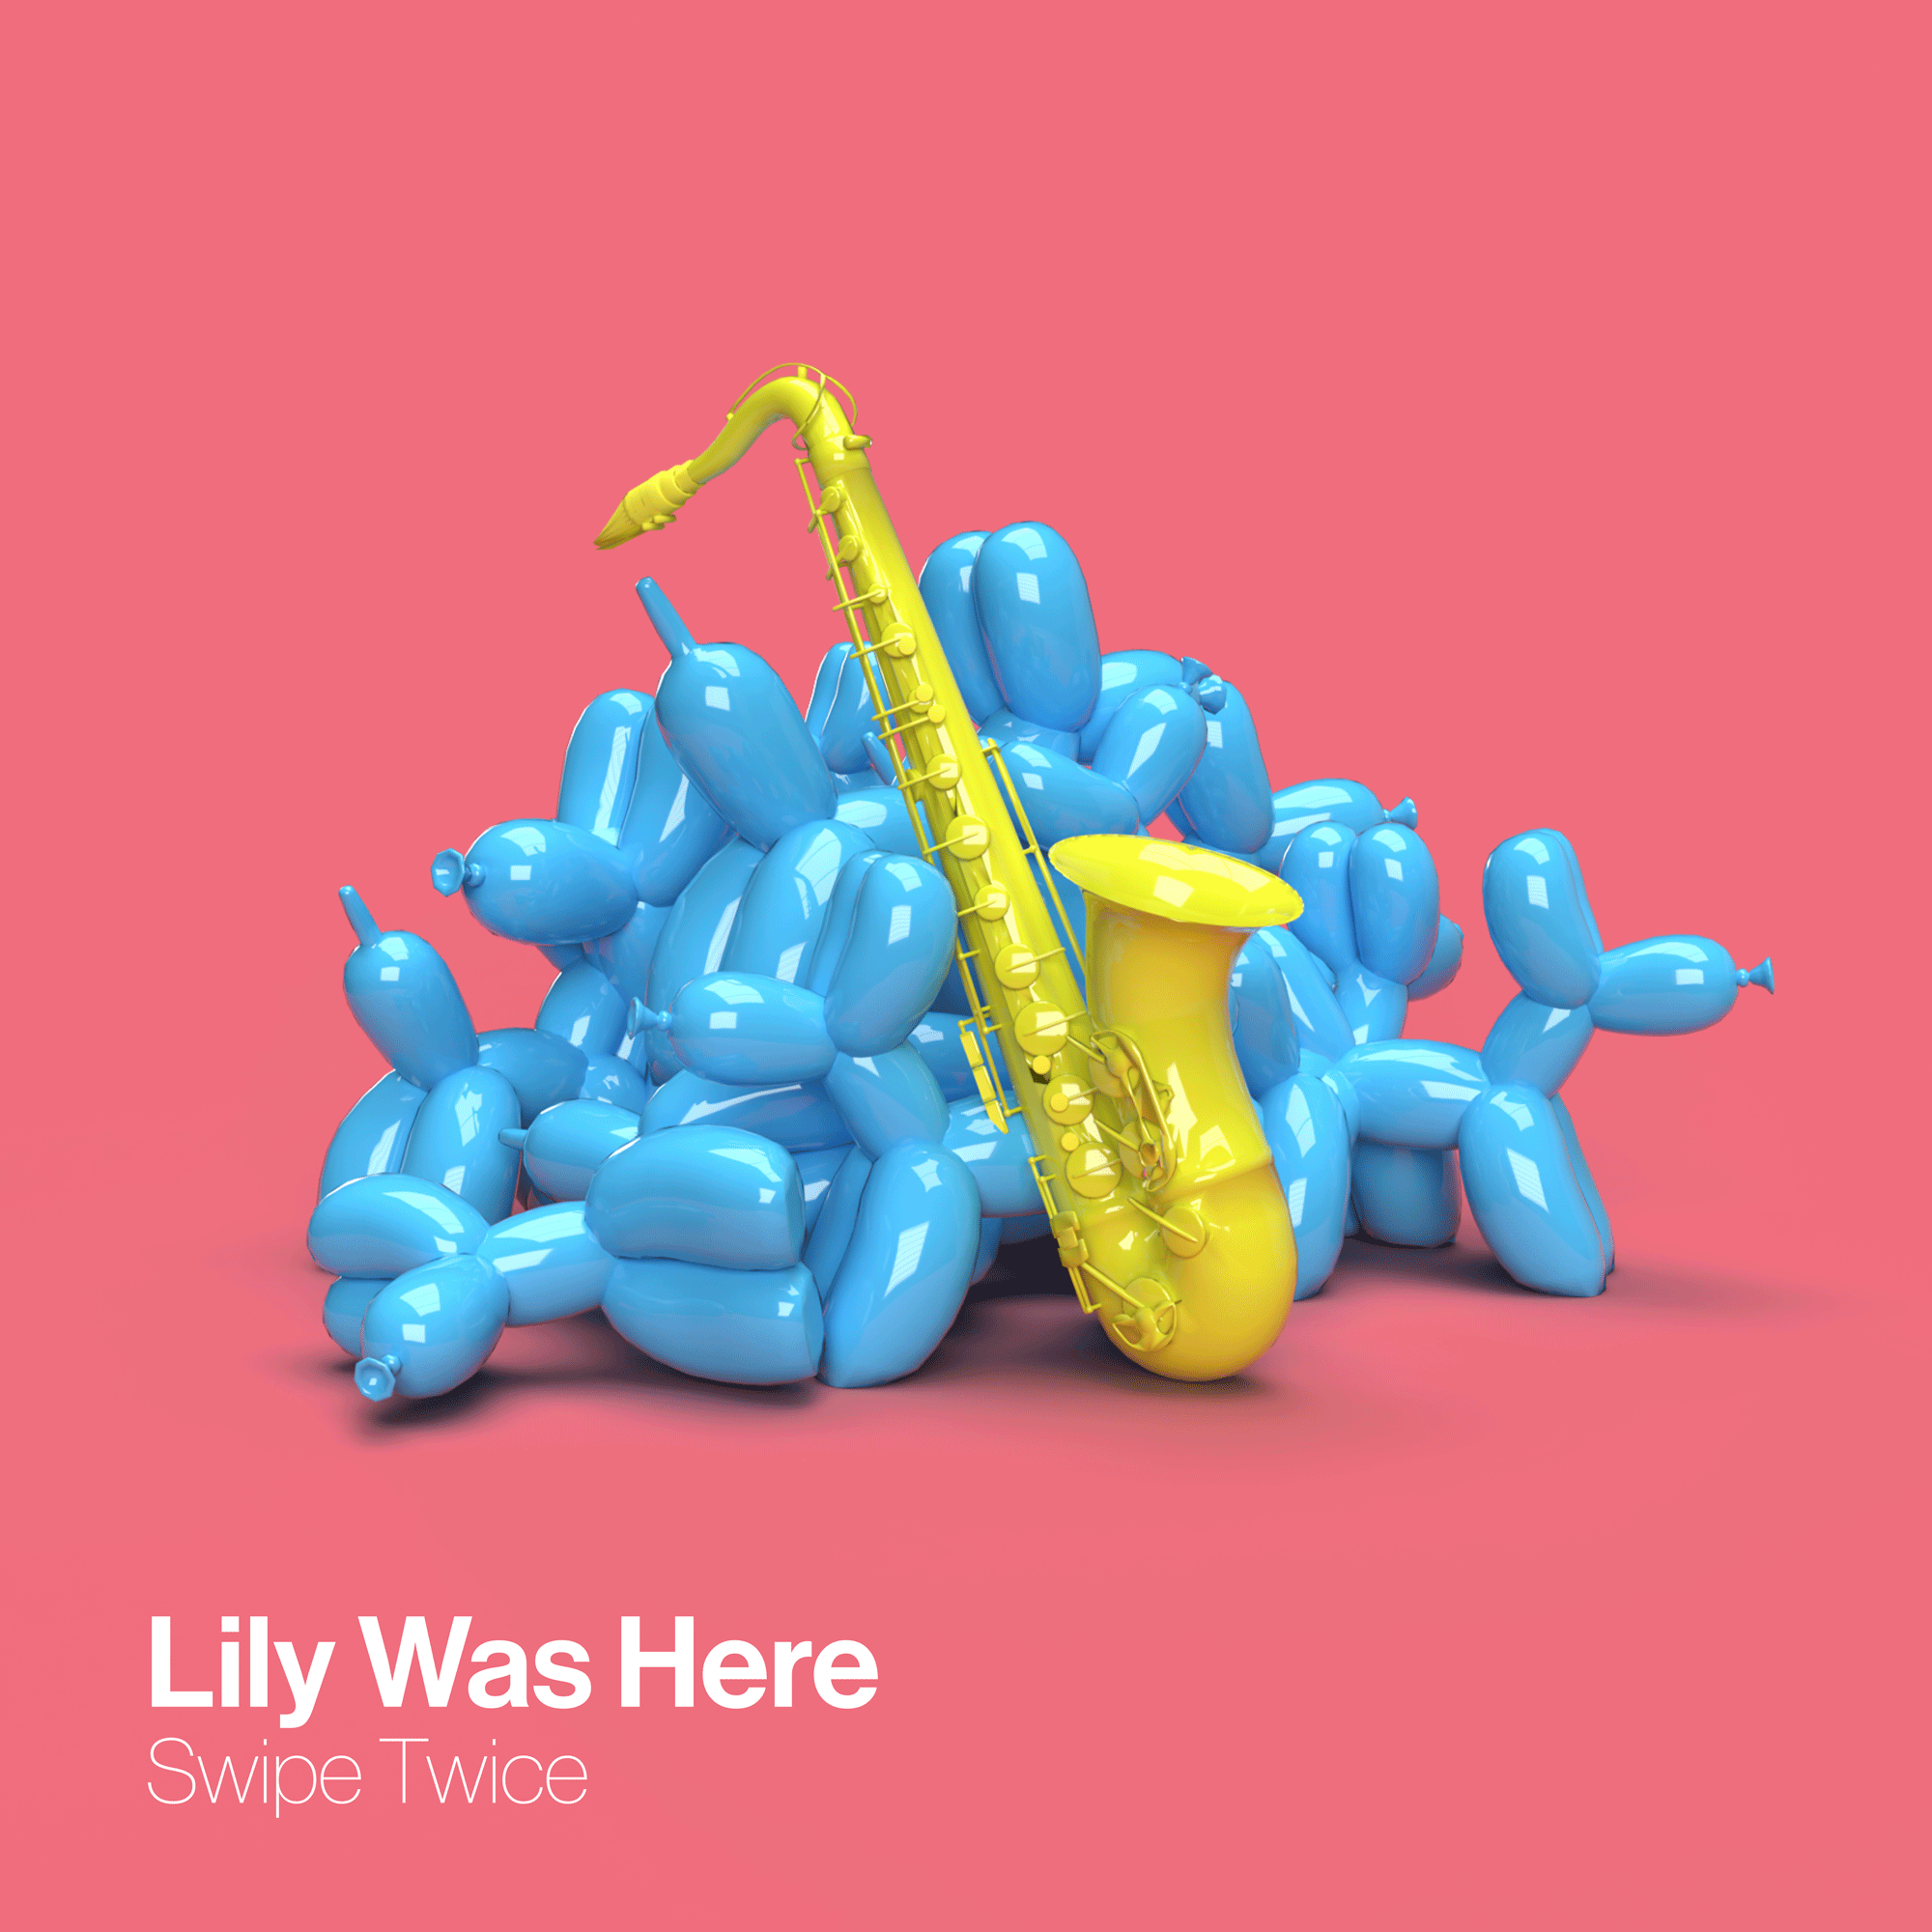 Ed Colman aka SWIPE TWICE presents a remix of the iconic track “Lily Was Here”